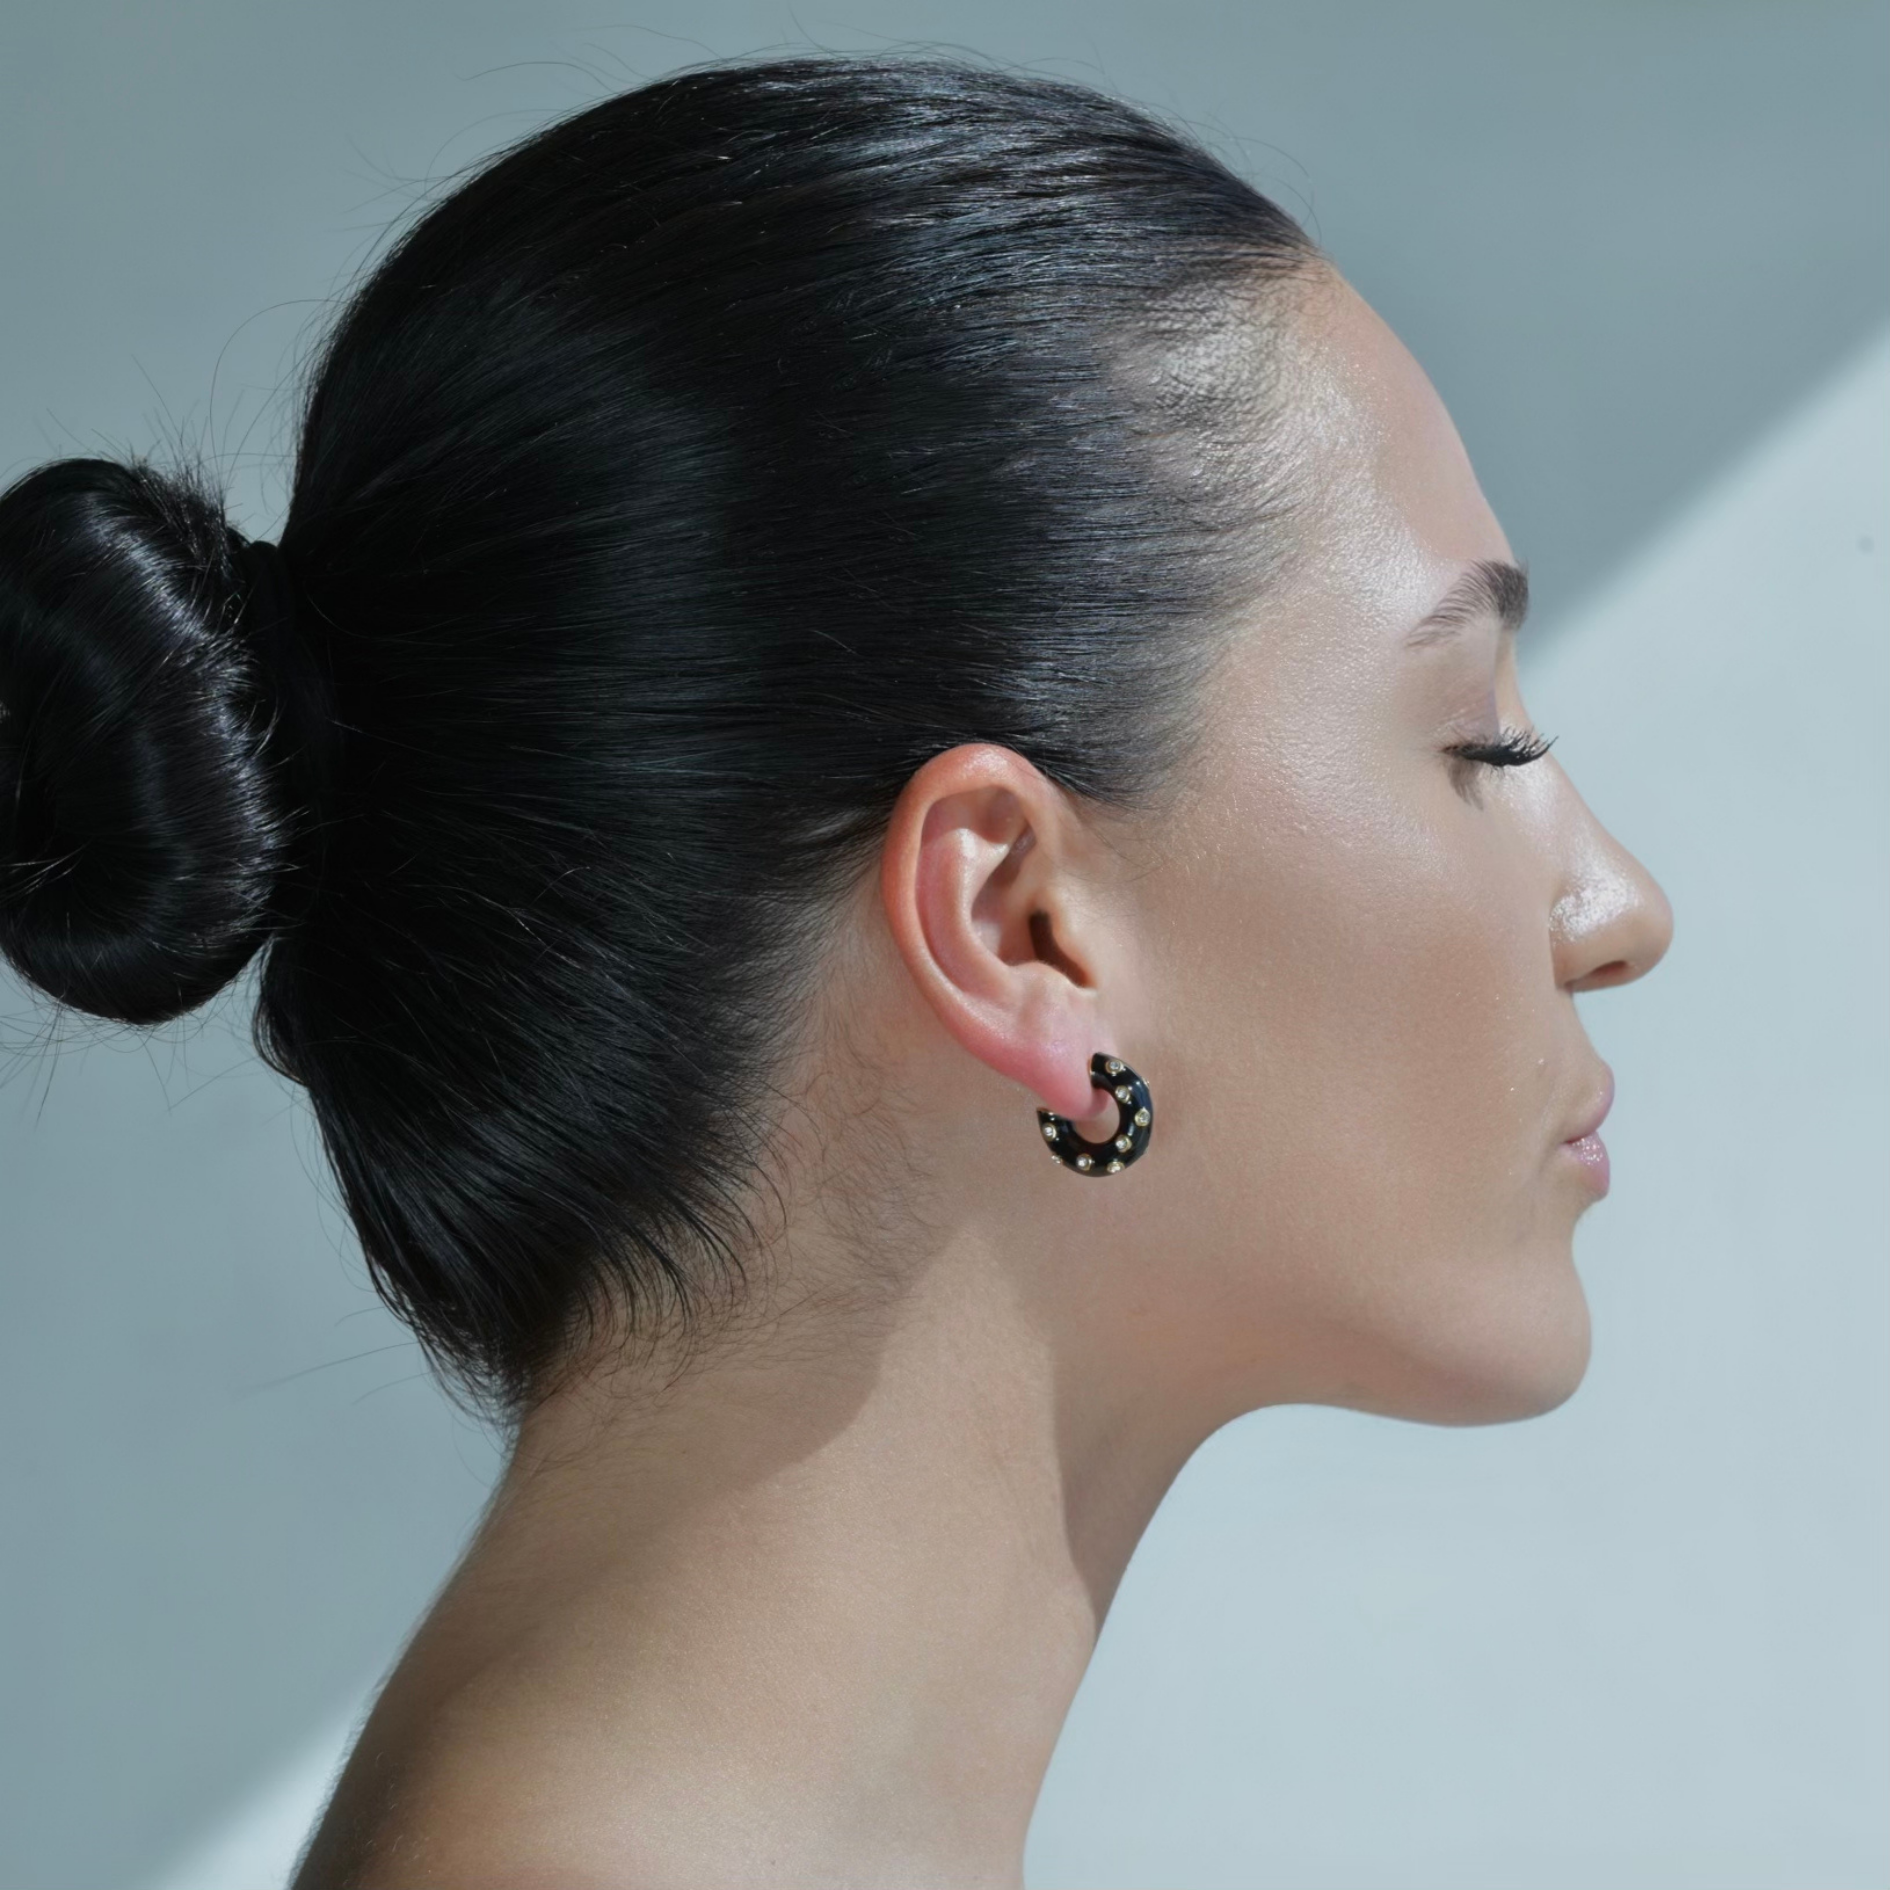 woman wearing Gold plated Hoop Earrings painted with black enamel and adorned with zircons.